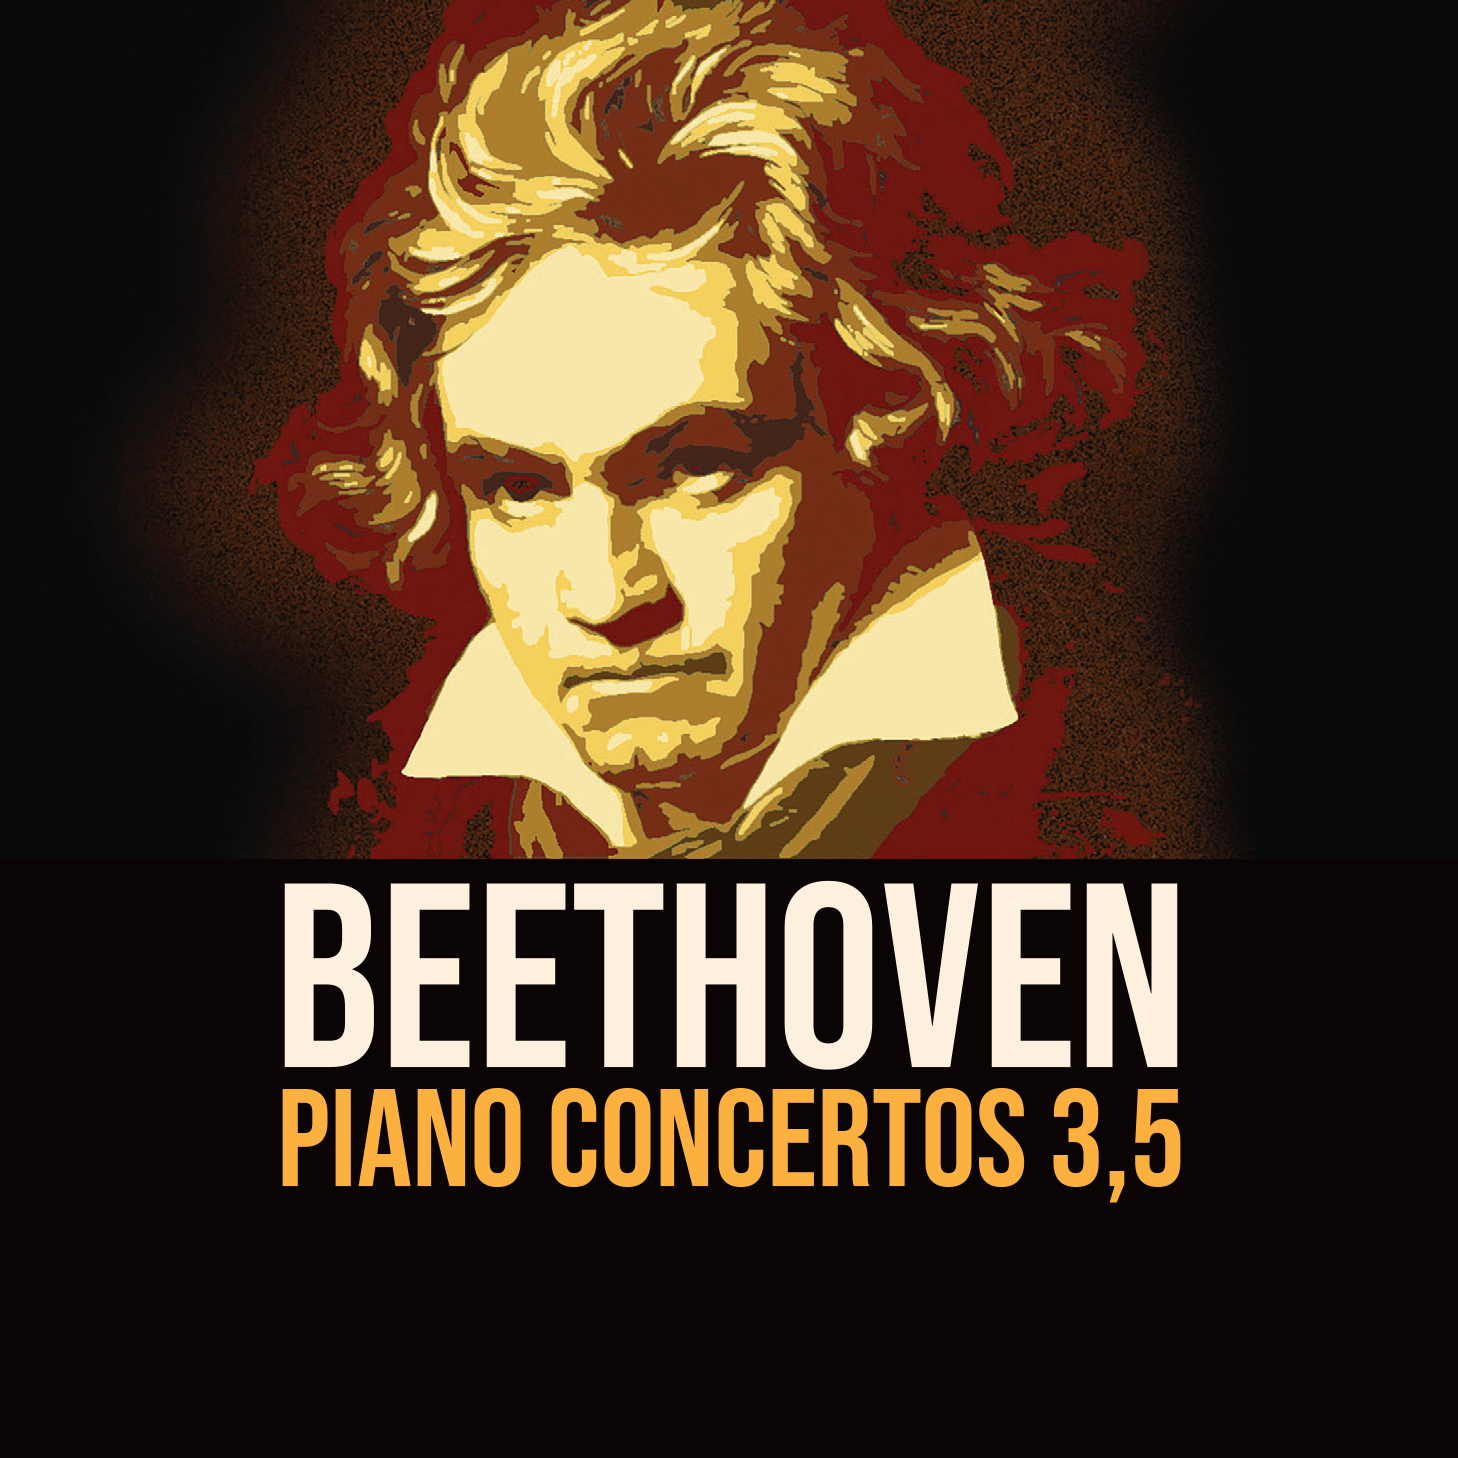 Image for Beethoven Piano Concertos 3, 5